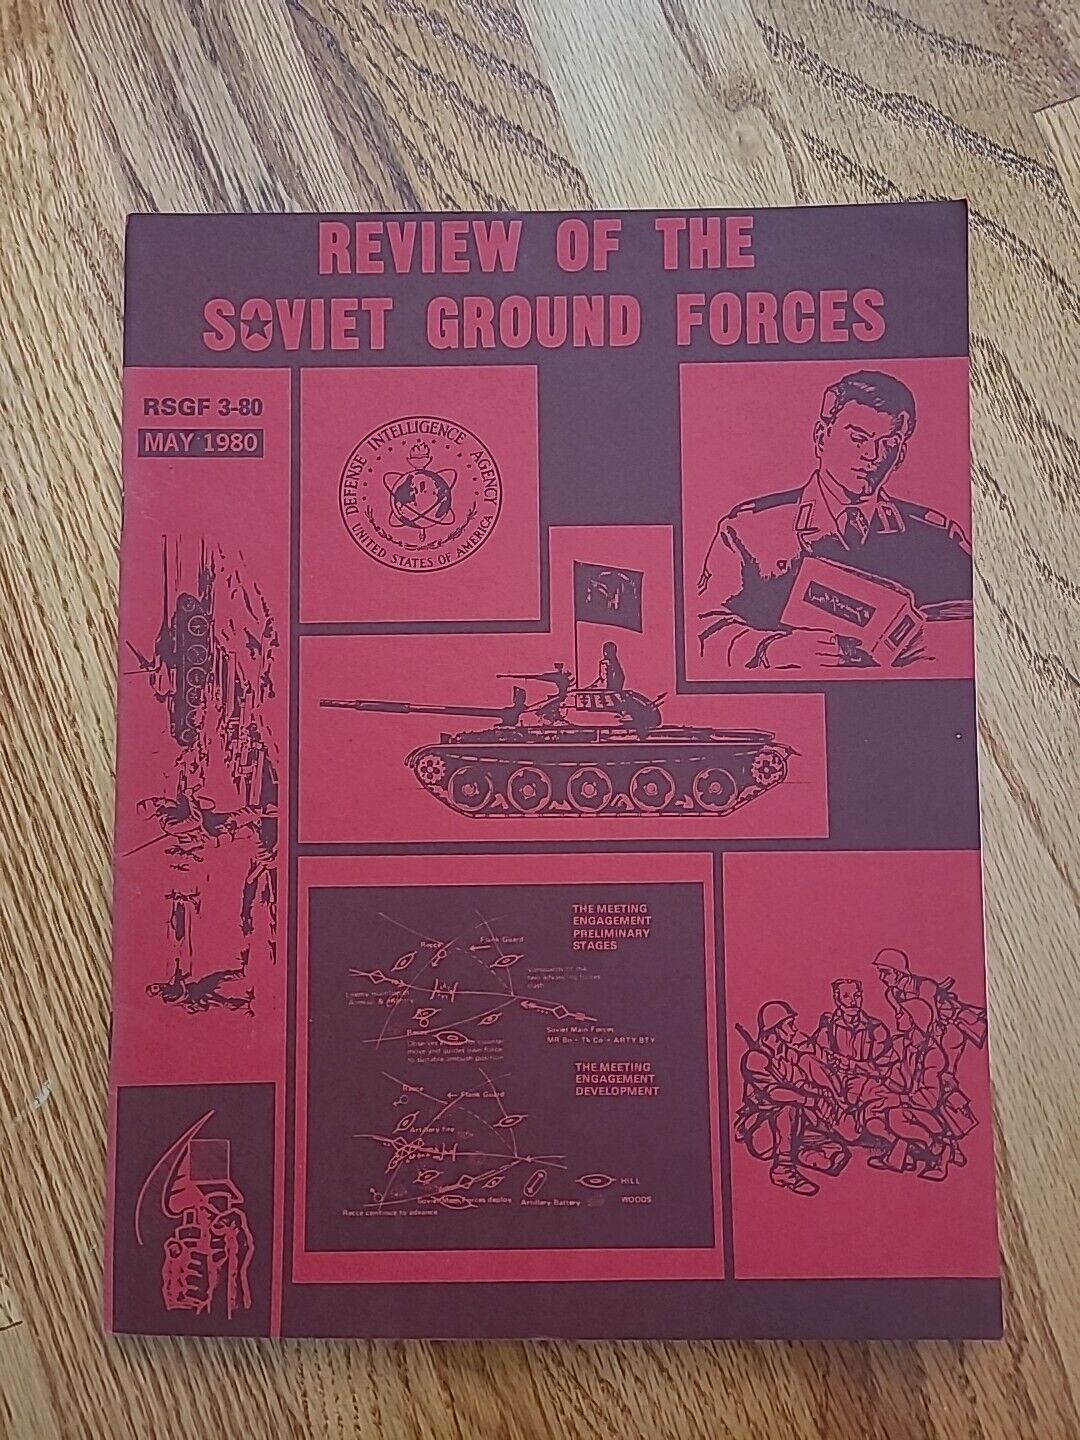 Review Of The Soviet Ground Forces.  RSGF 3-80.  May 1980